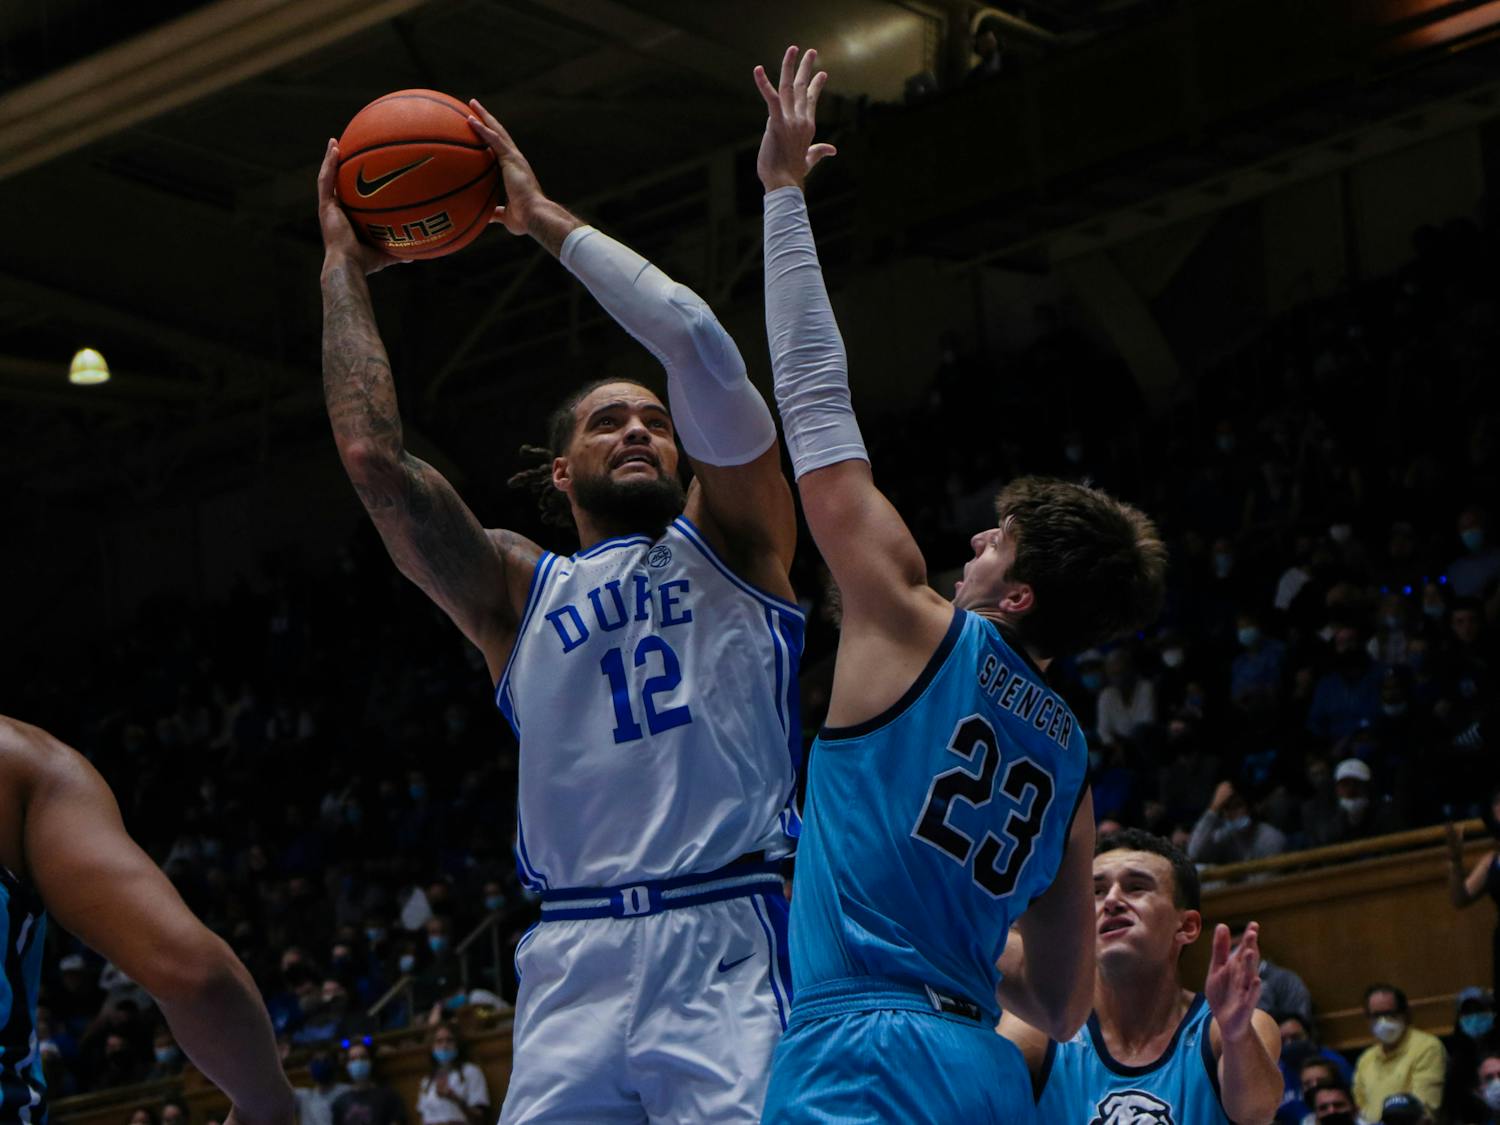 Moore, Banchero lead Duke men's basketball past The Citadel's 3-point attack with an ending score of 107-81